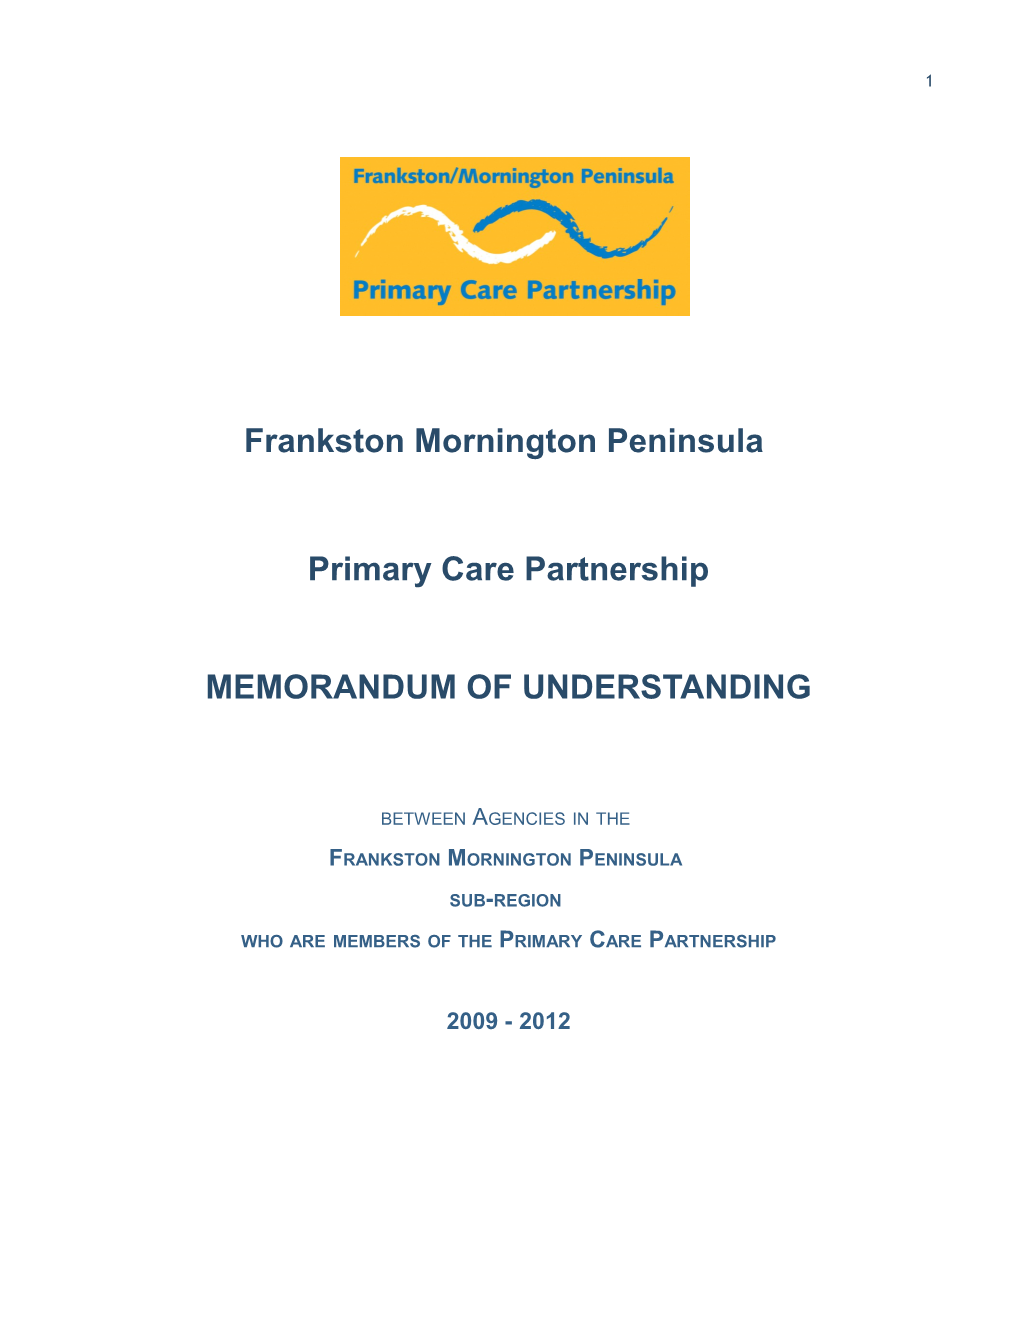 Who Are Members of the Primary Care Partnership